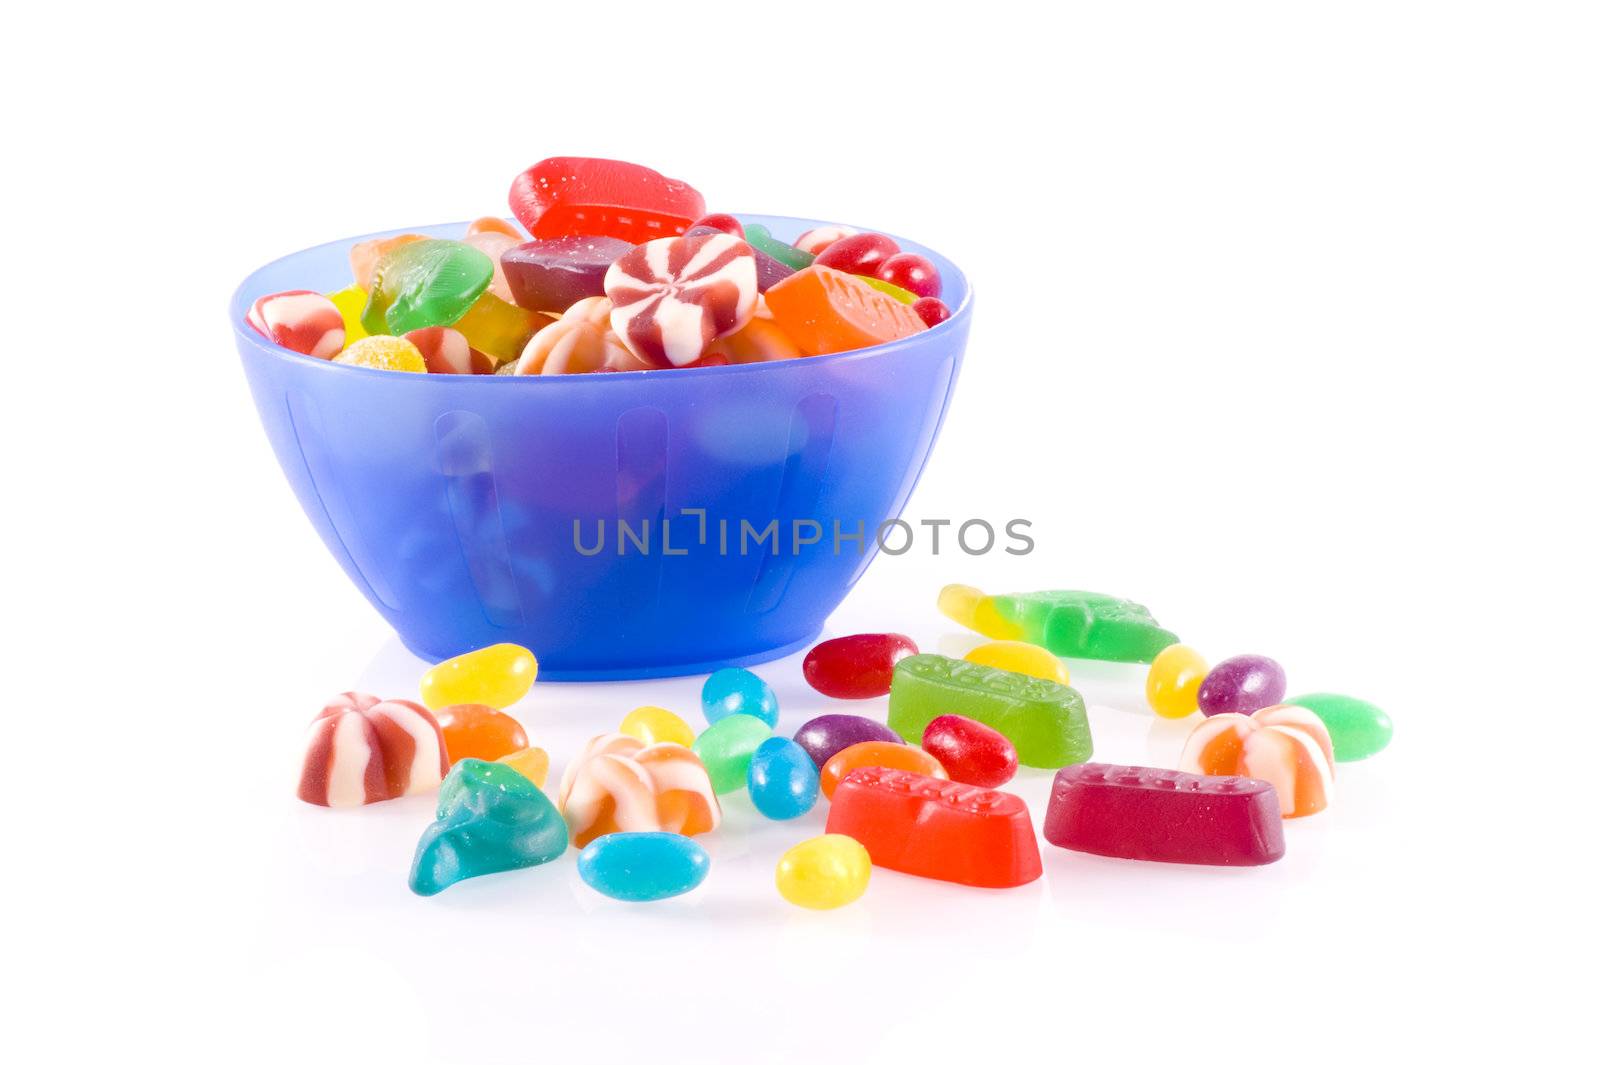 Blue bowl with different kinds of colorful candy isolated on white.